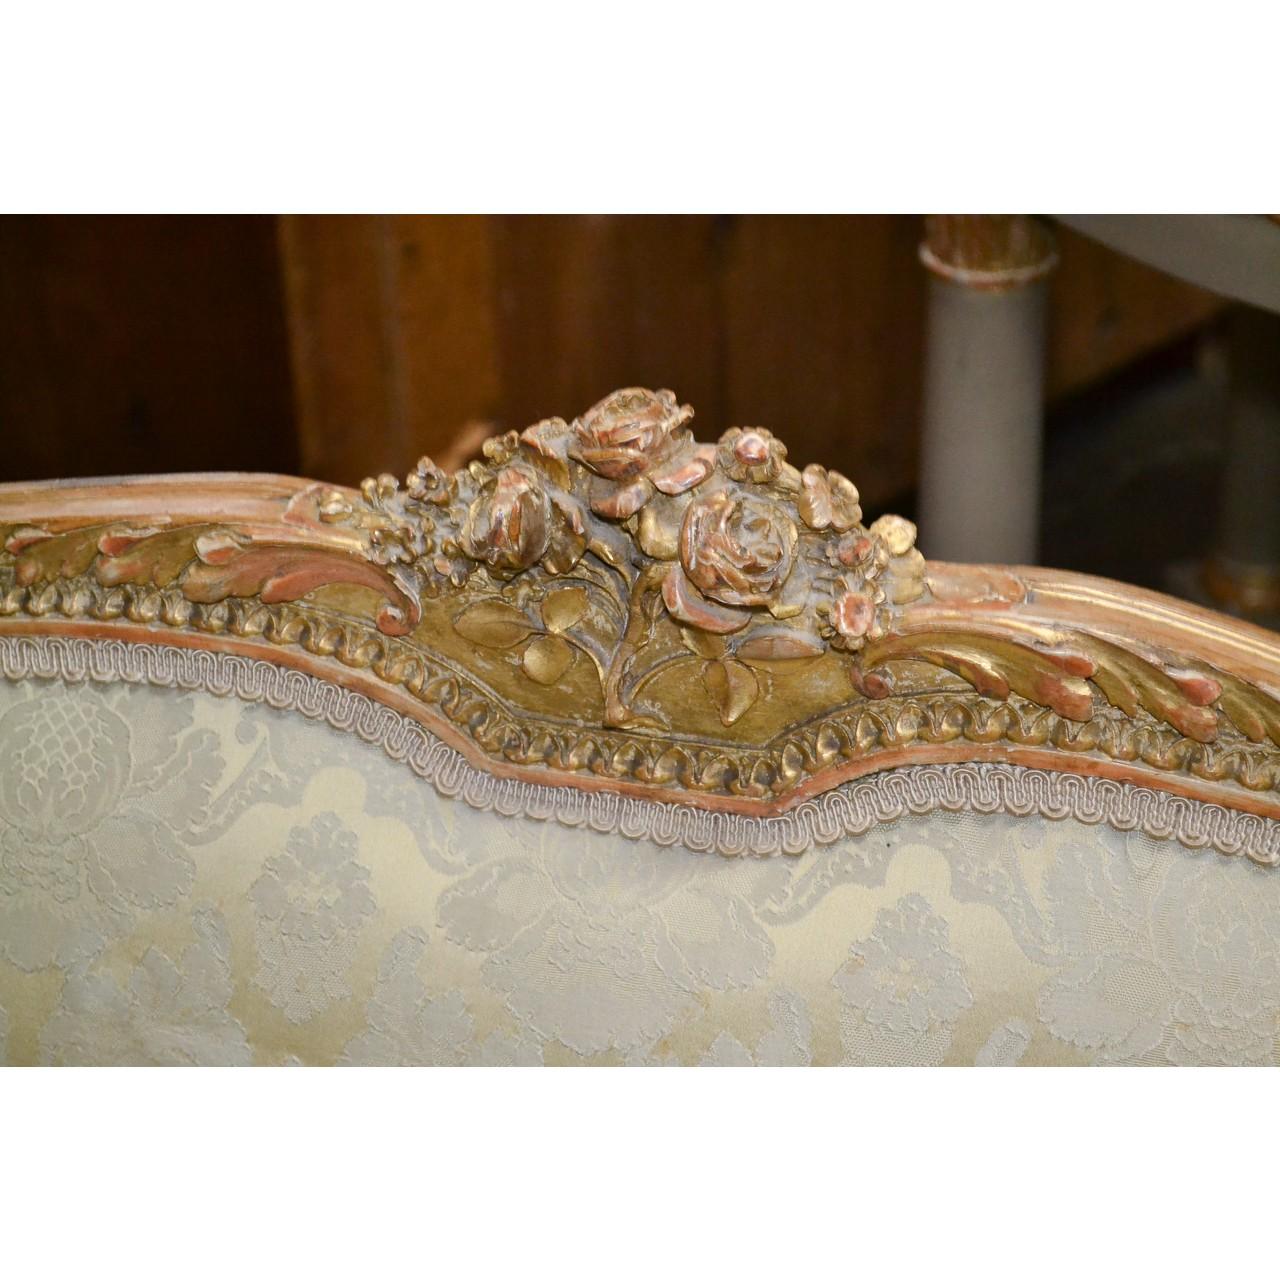 Beautifully elegant 19th century French Louis XVI style giltwood and upholstered settee or loveseat. The shaped crest-rail with a hand-carved rose cluster and two crown finials. The arms with finely carved acanthus leaves and raised on fluted and